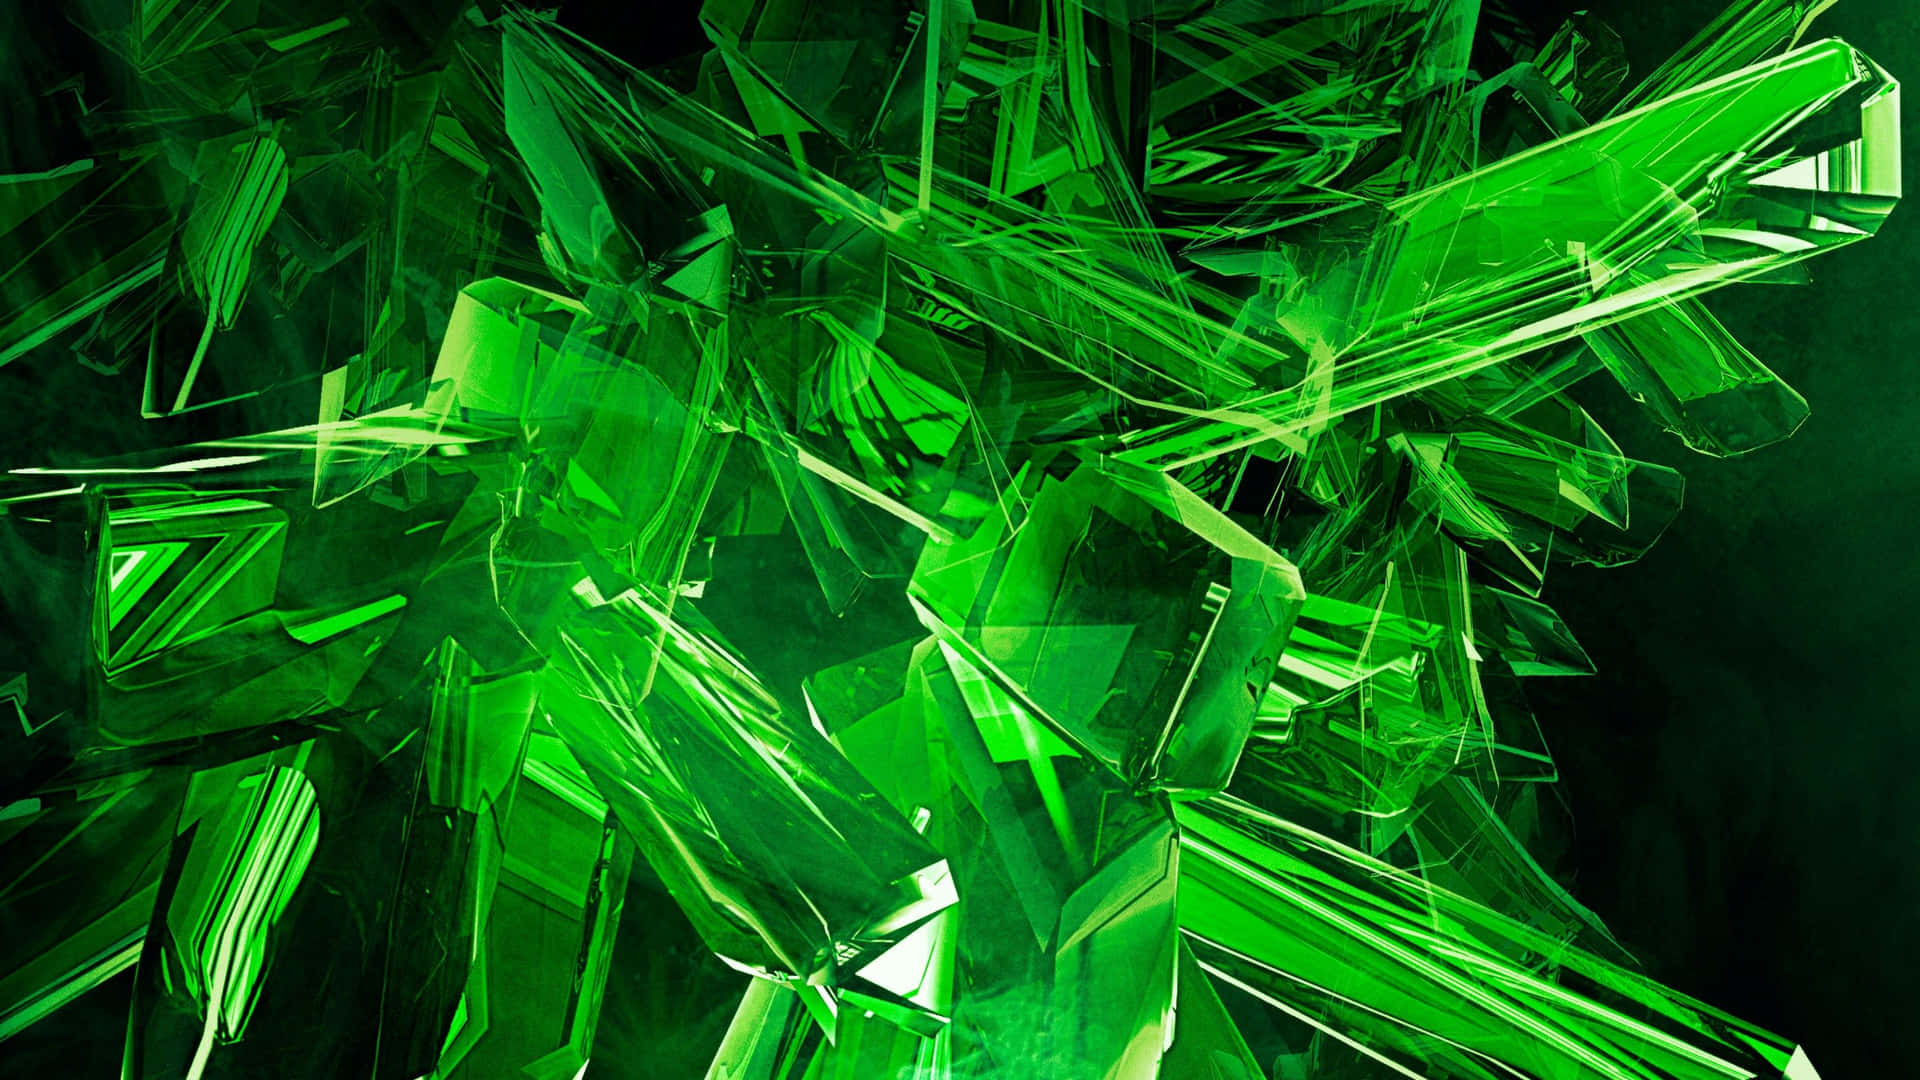 Geometric 3d Shapes In Green And Blue Background